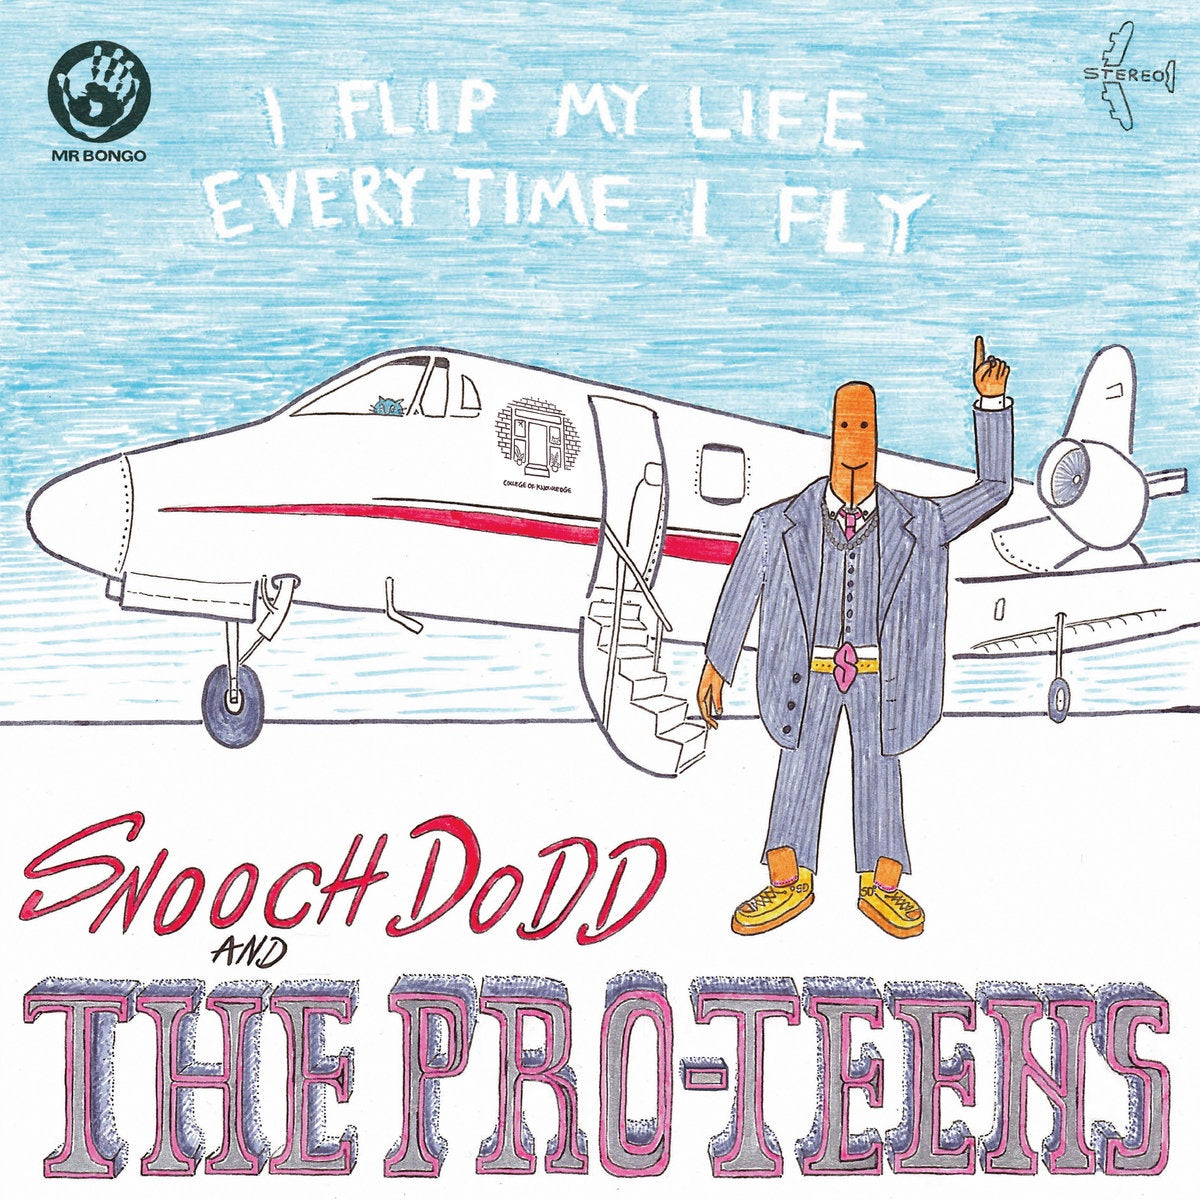 Snooch Dodd And The Pro-Teens – I Flip My Life Every Time I Fly